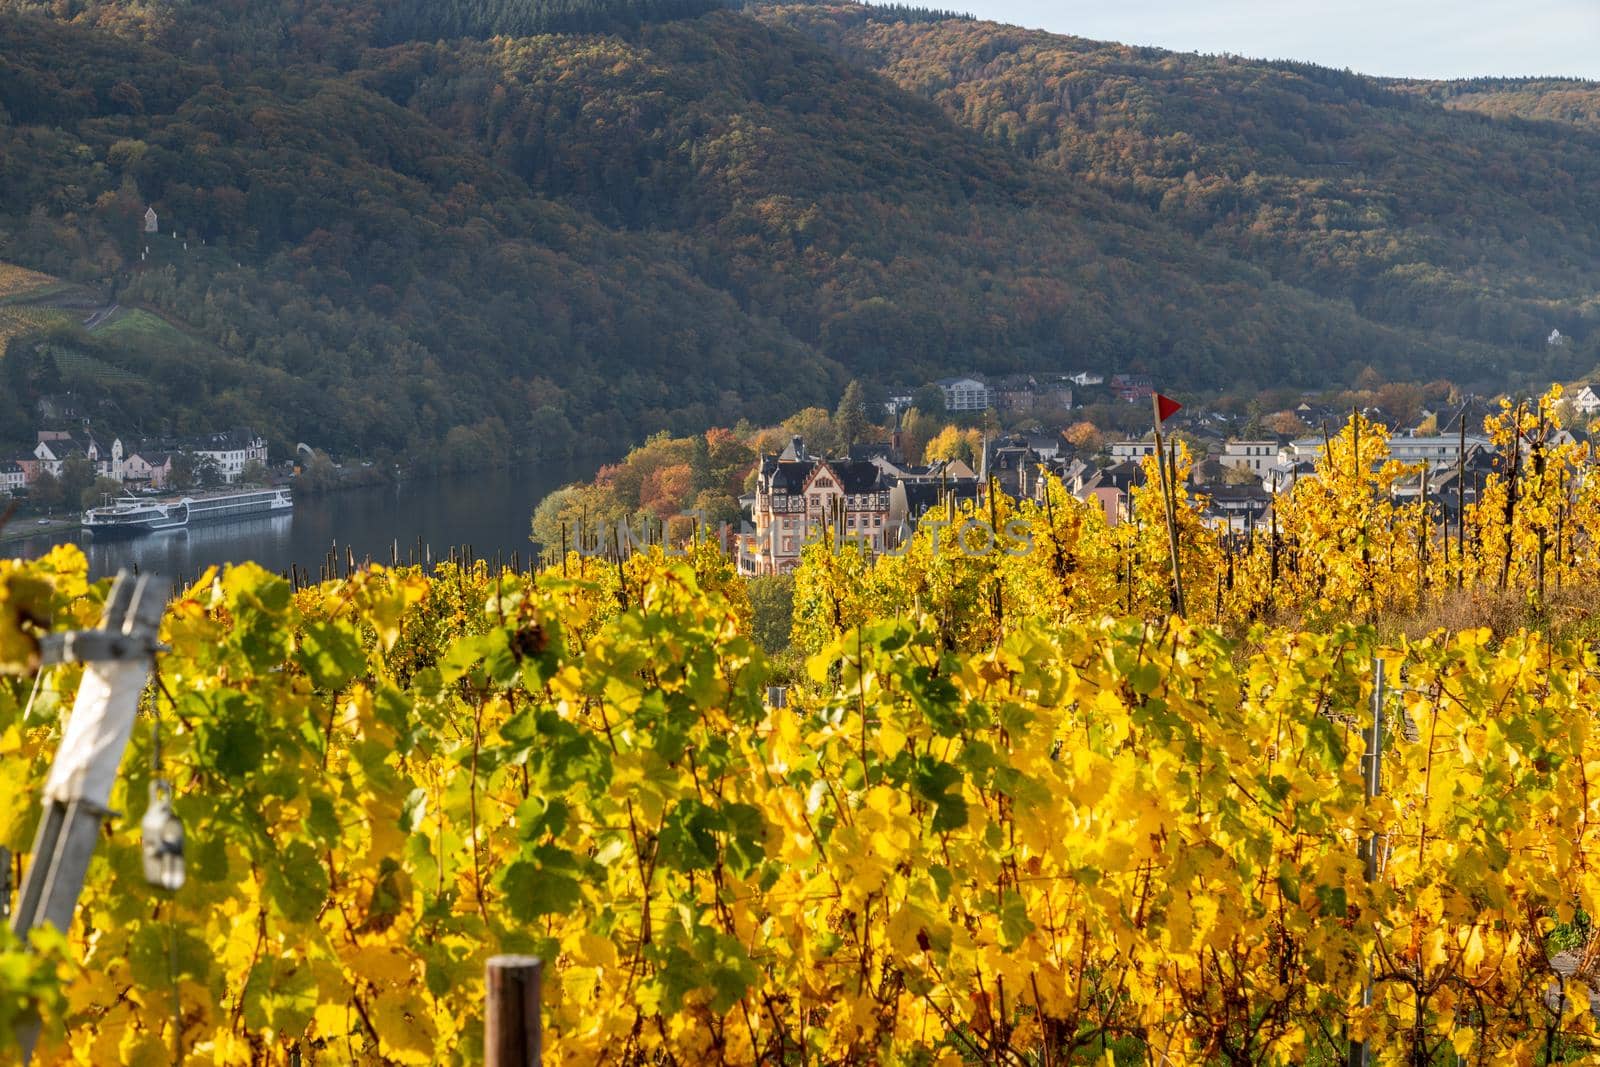 Bernkastel-Kues and the river Moselle in autumn with multi colored vineyard in the foreground by reinerc